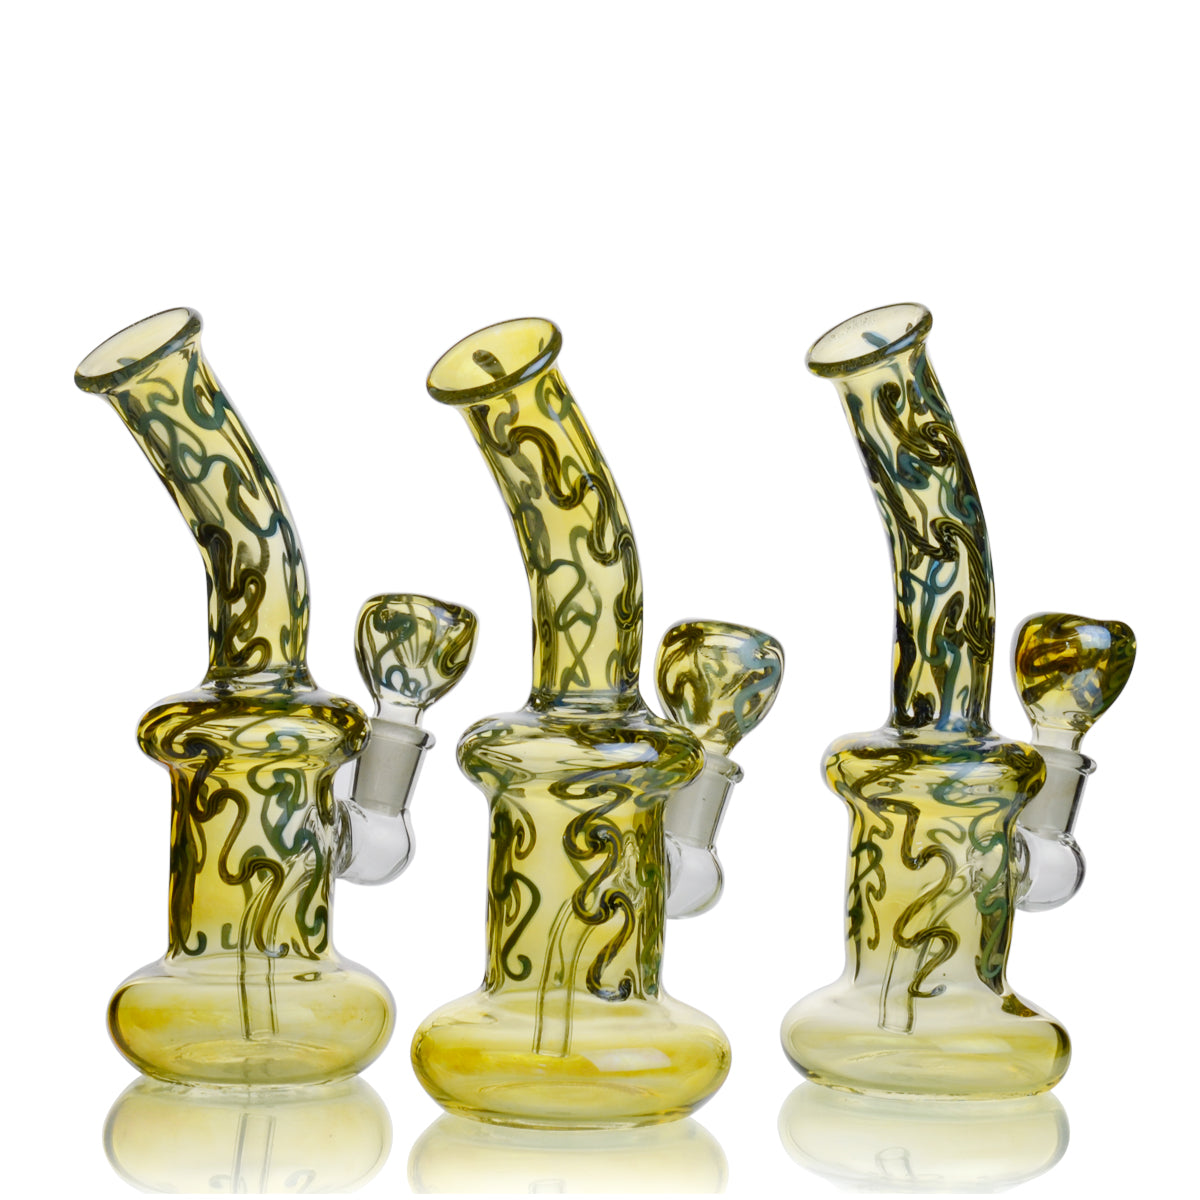 8" Fumed Body Twisting Designs 14mm Male Bowl Included Approx 230 Grams - LA Wholesale Kings